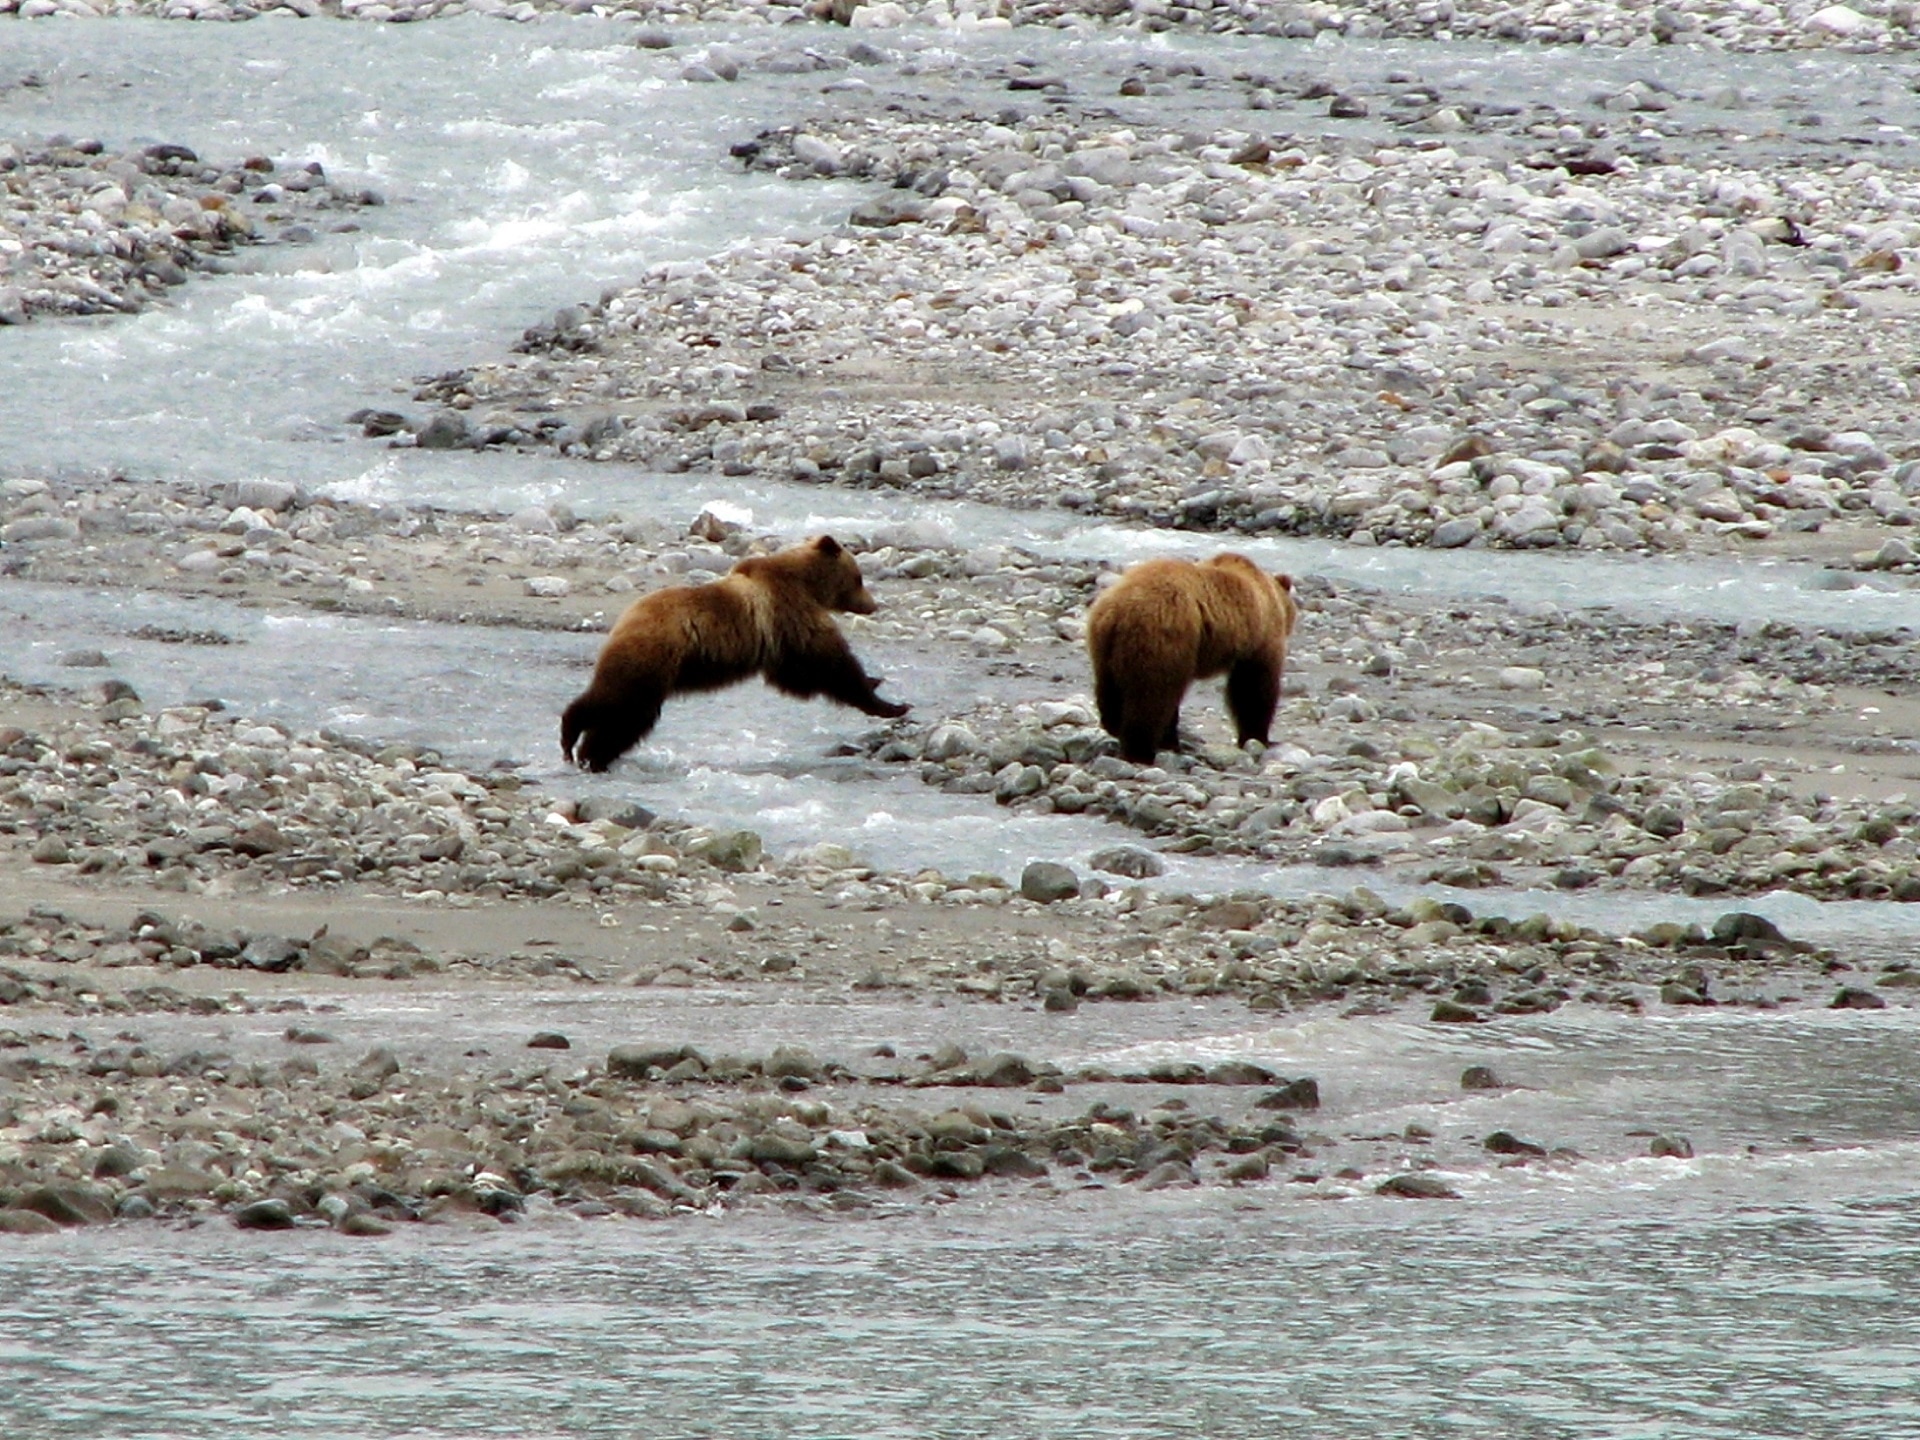 2 brown grizzly bears